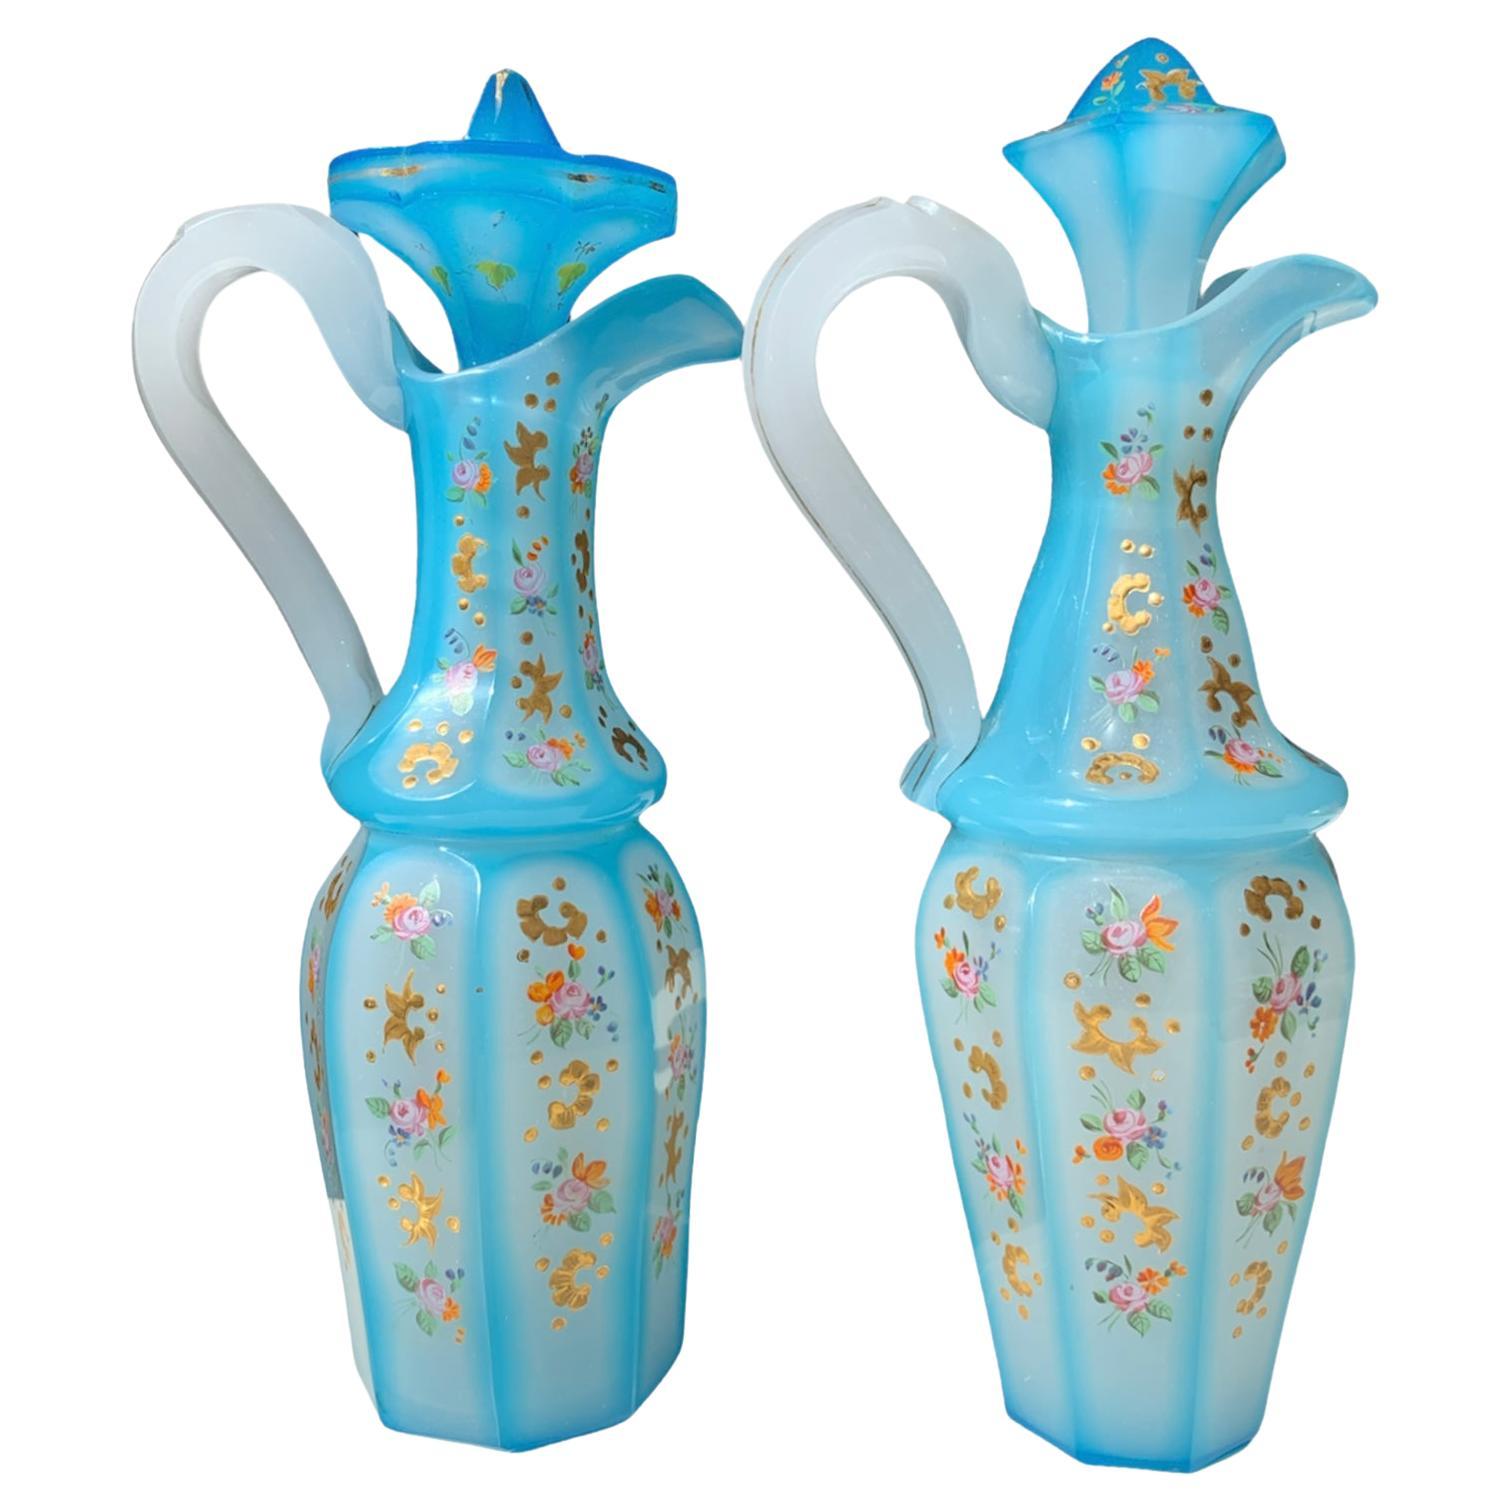 High-quality pair of pitchers with stoppers, made of opal-alabaster overlay glass, cut and decorated all around with colorful gilded enamel work, the white opaque glass is cased with a blue layer of opaque glass, circular body richly enameled with